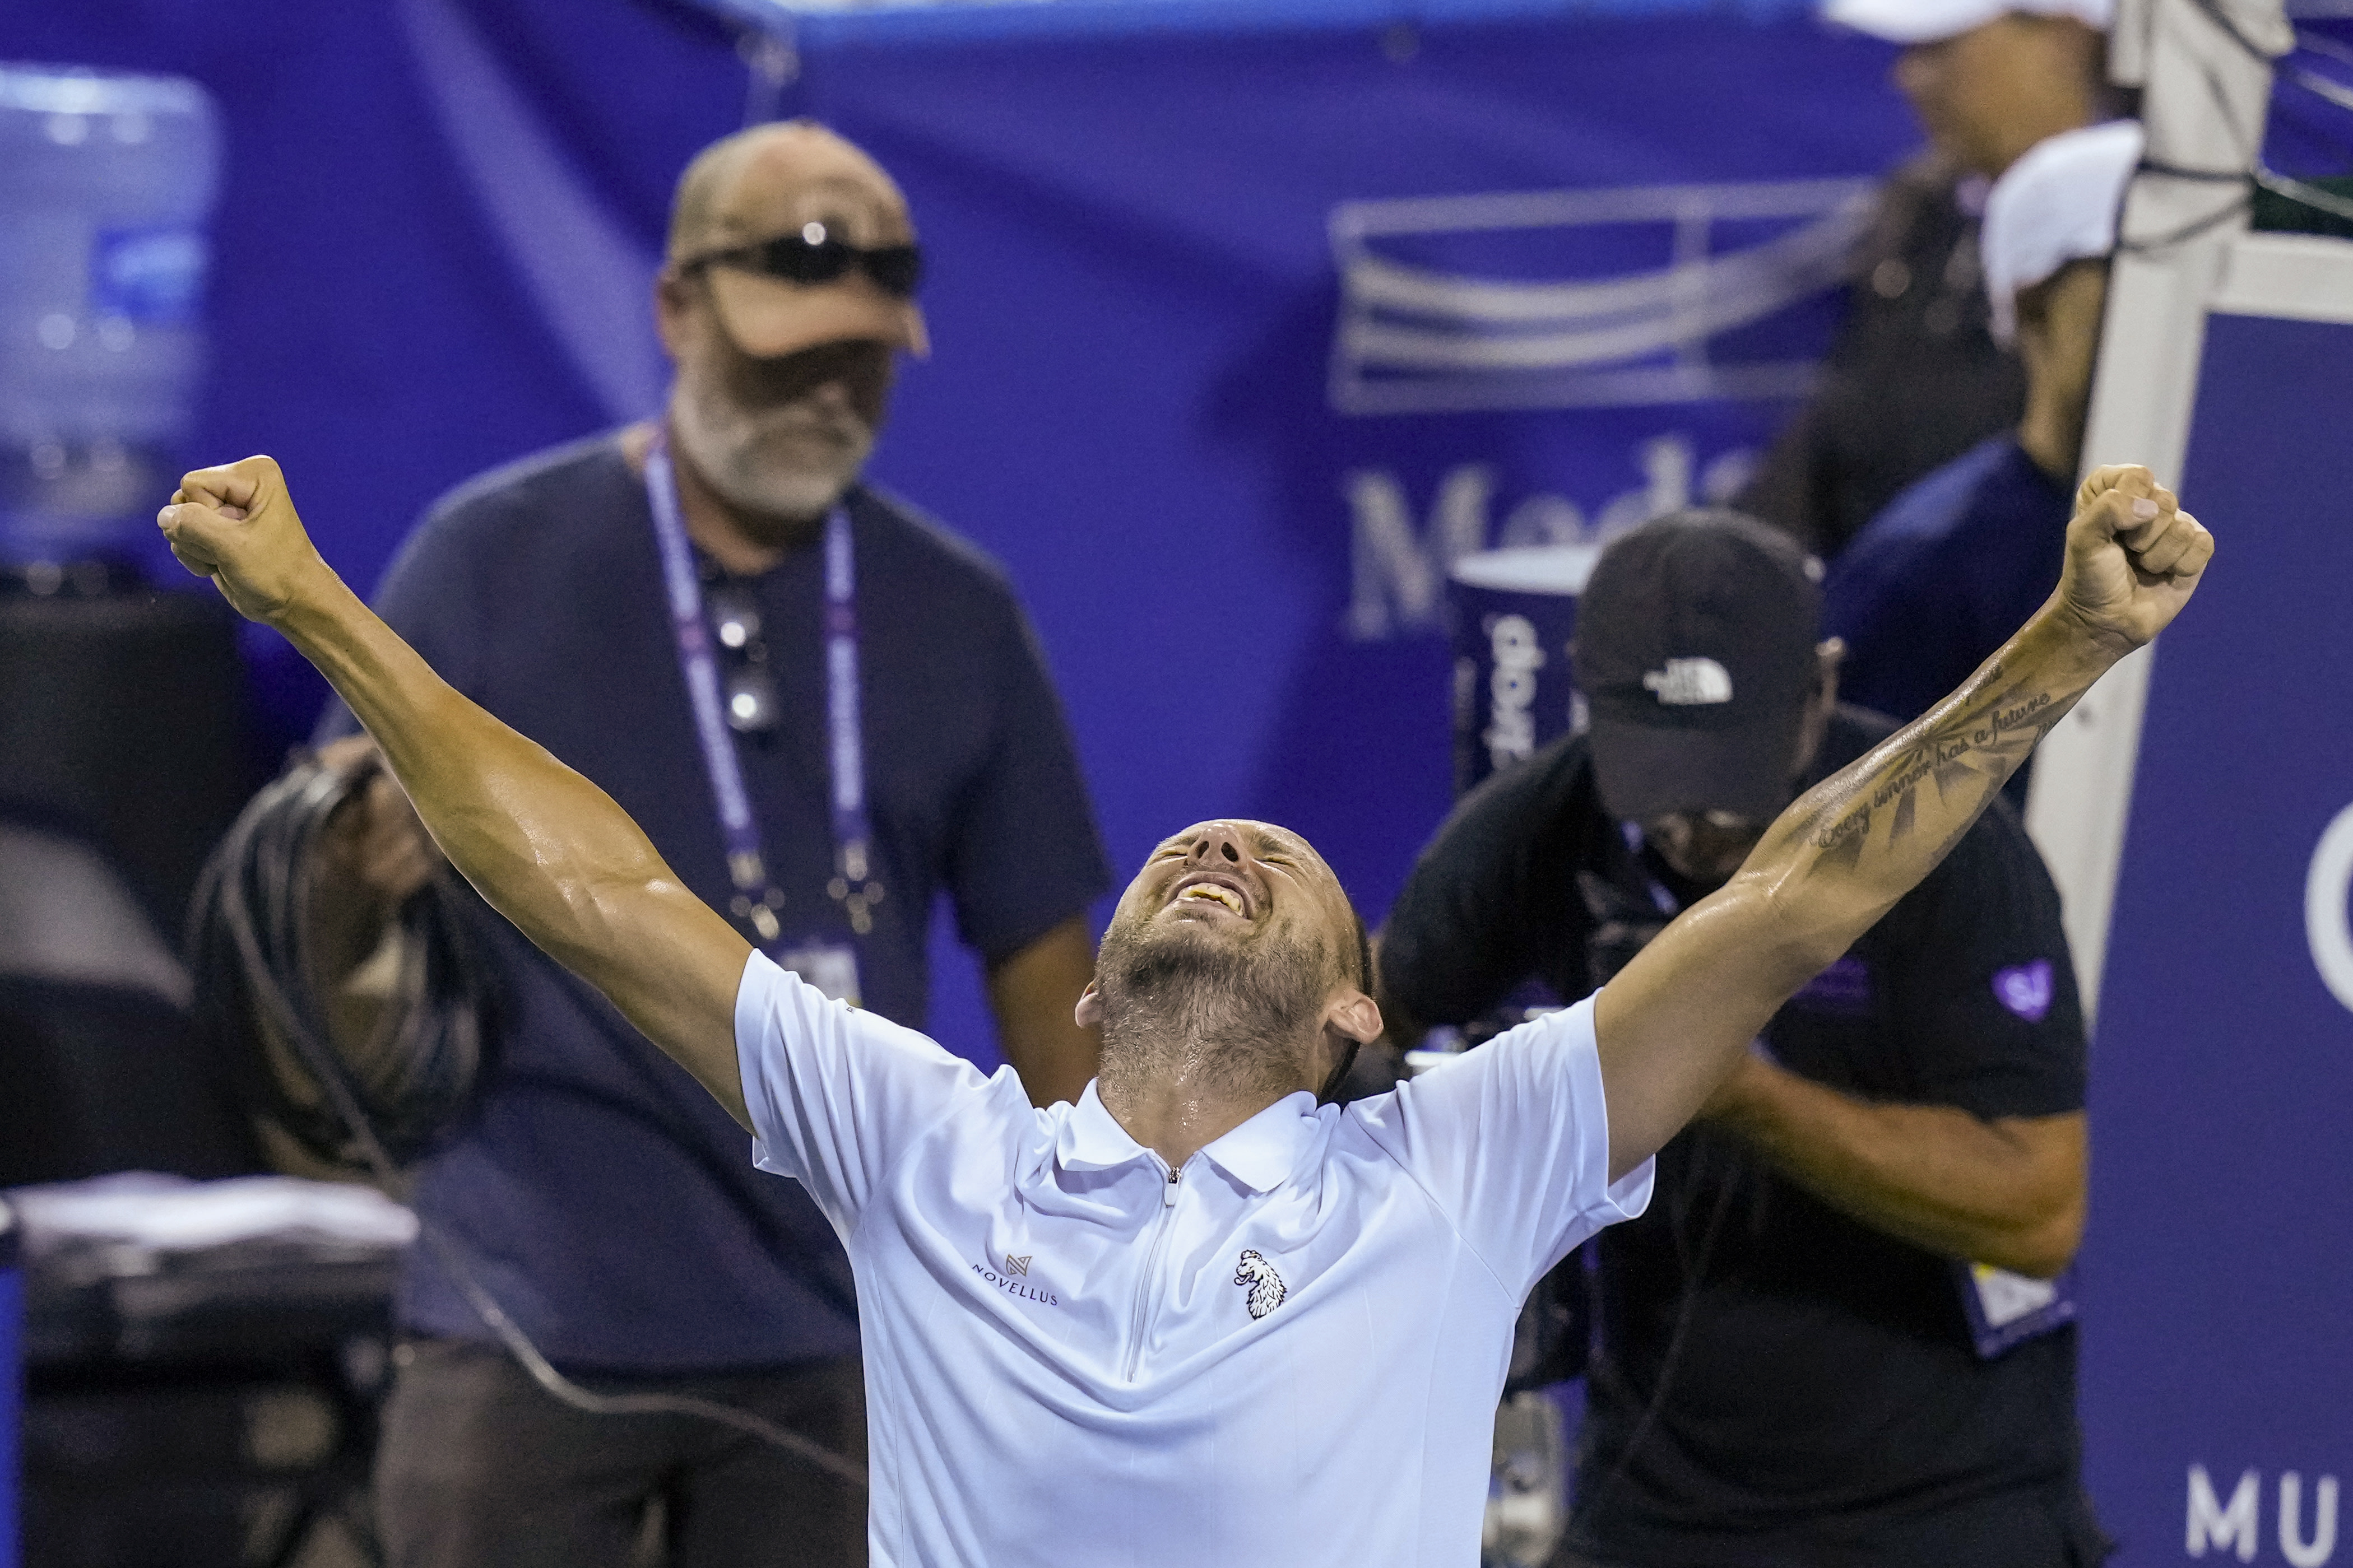 Dan Evans wins his second career ATP title by beating Tallon Griekspoor in Washington DC